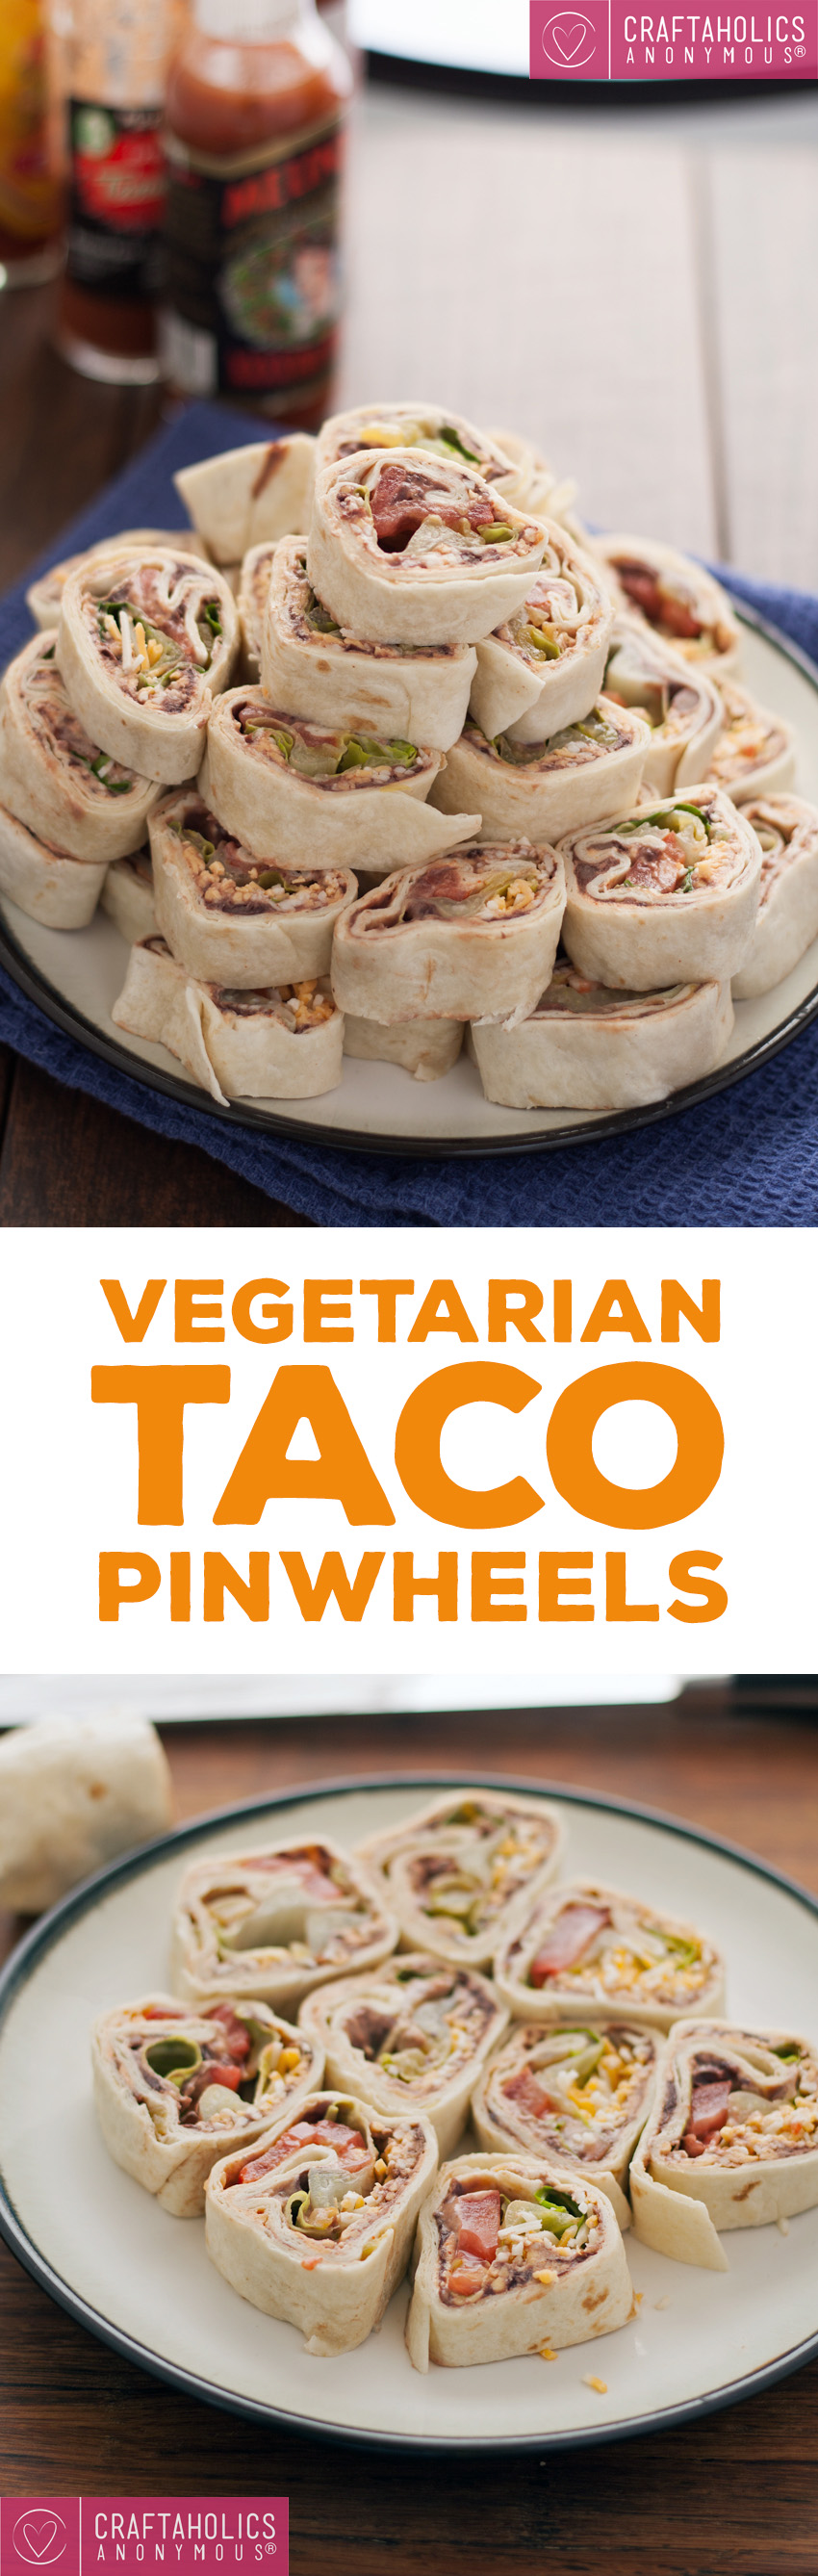 Amazing Vegetarian Taco Pinwheels Recipe || Great appetizer and party pleaser!